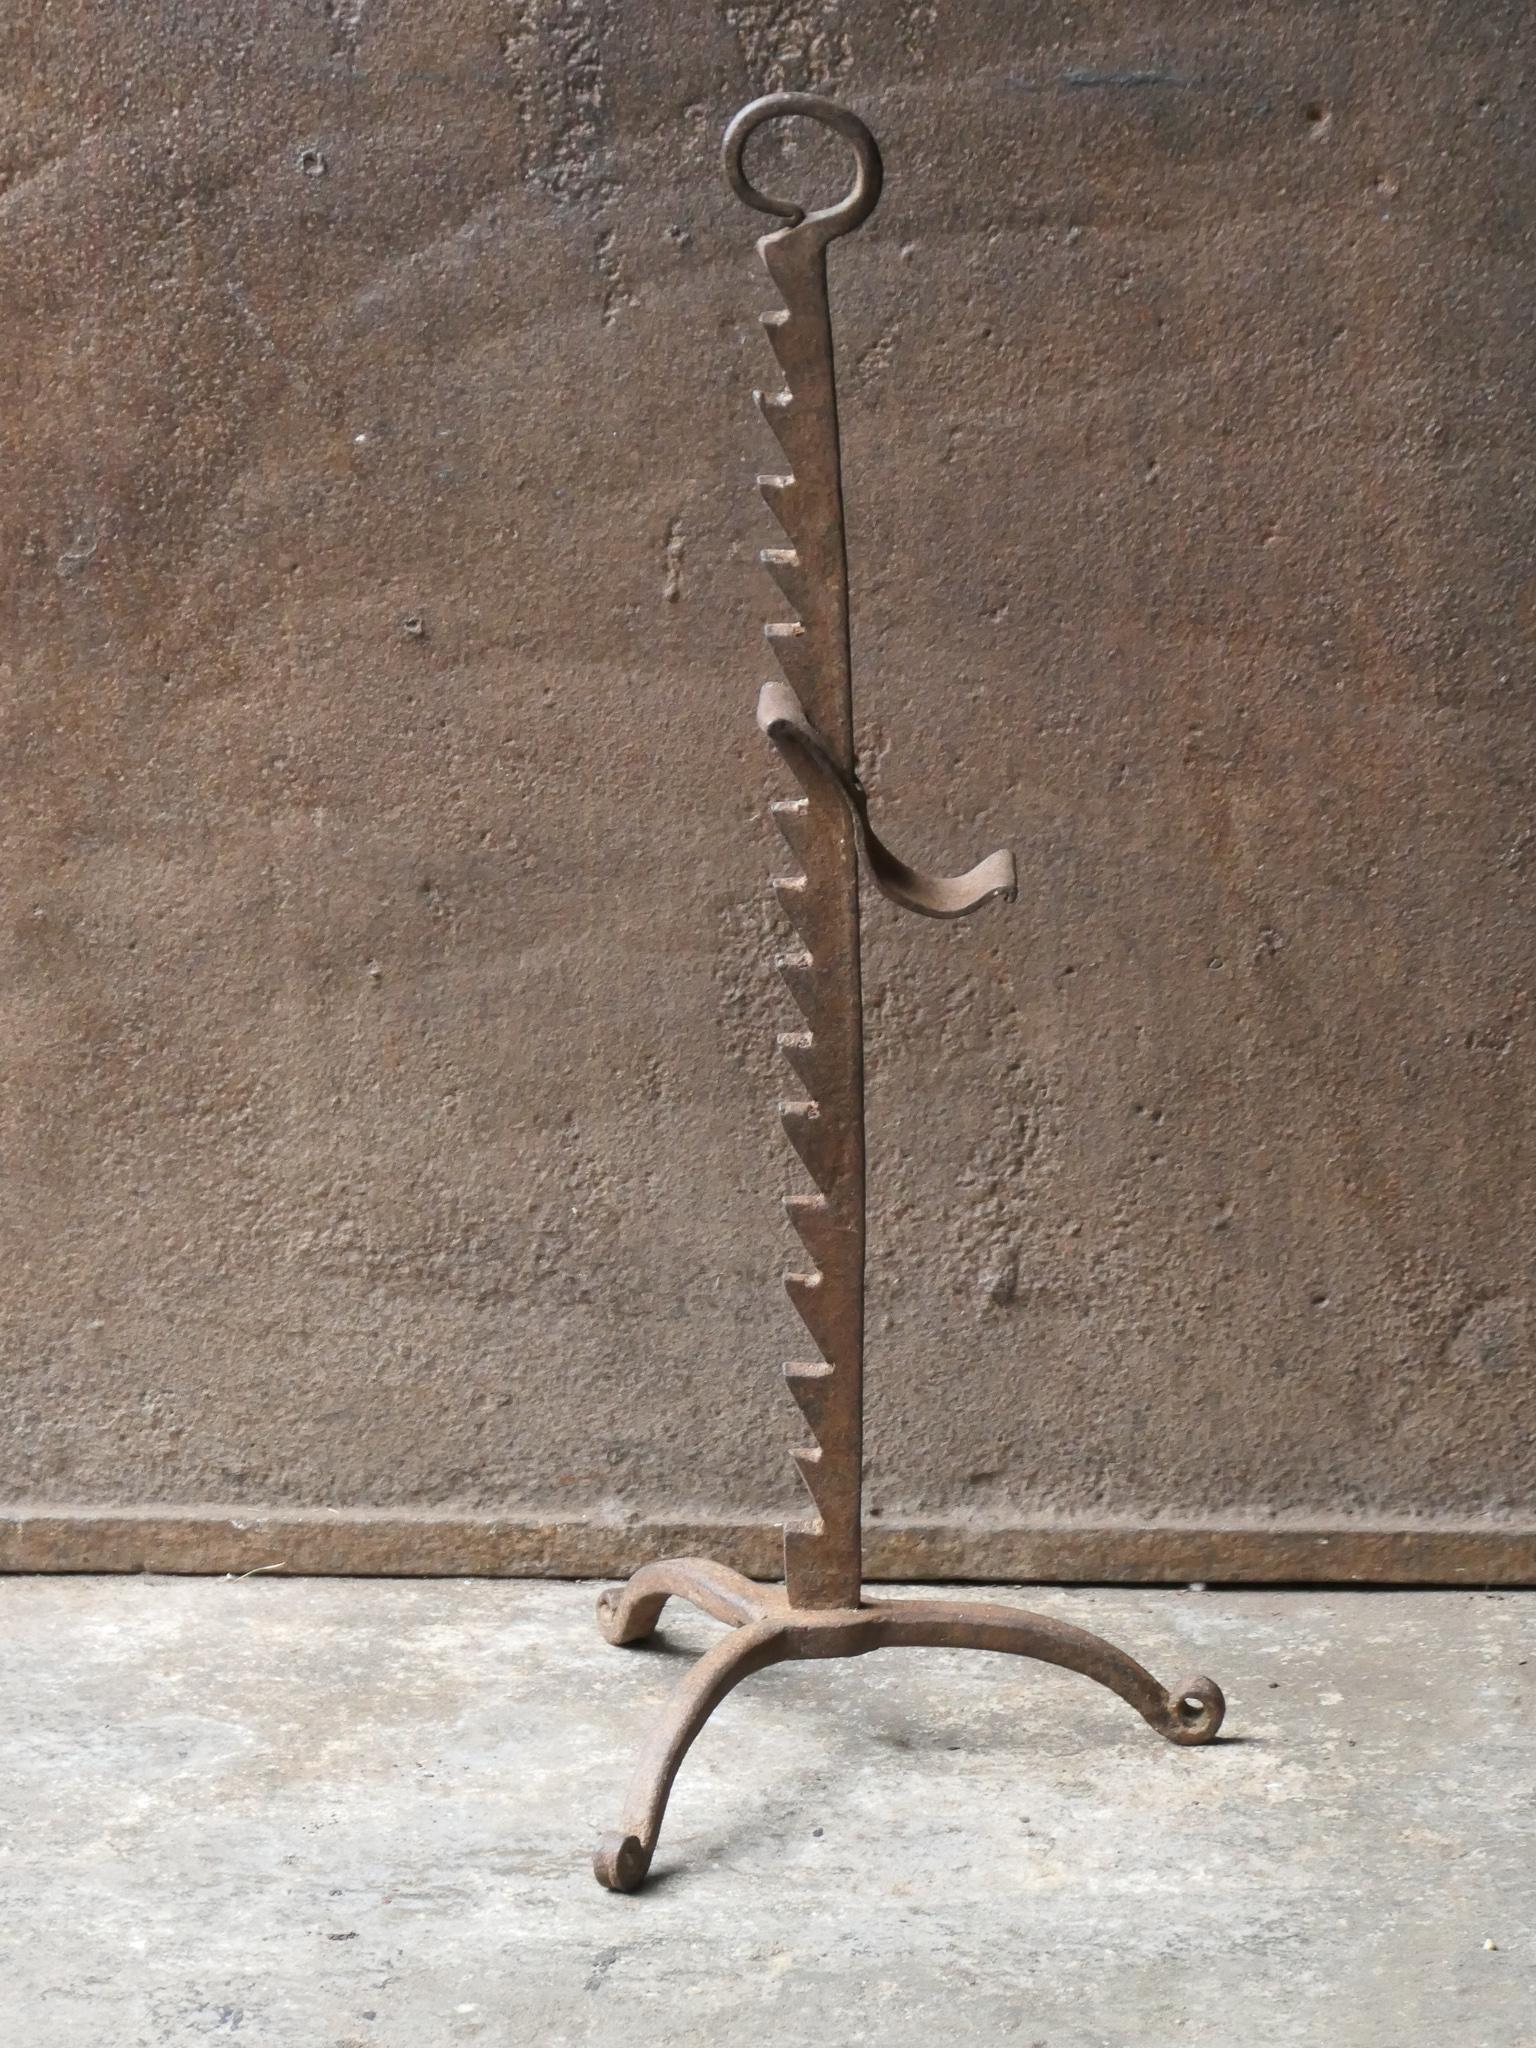 18th - 19th century French neoclassical period stand for a roasting jack. The stand is hand forged and made of wrought iron. The condition is good.







